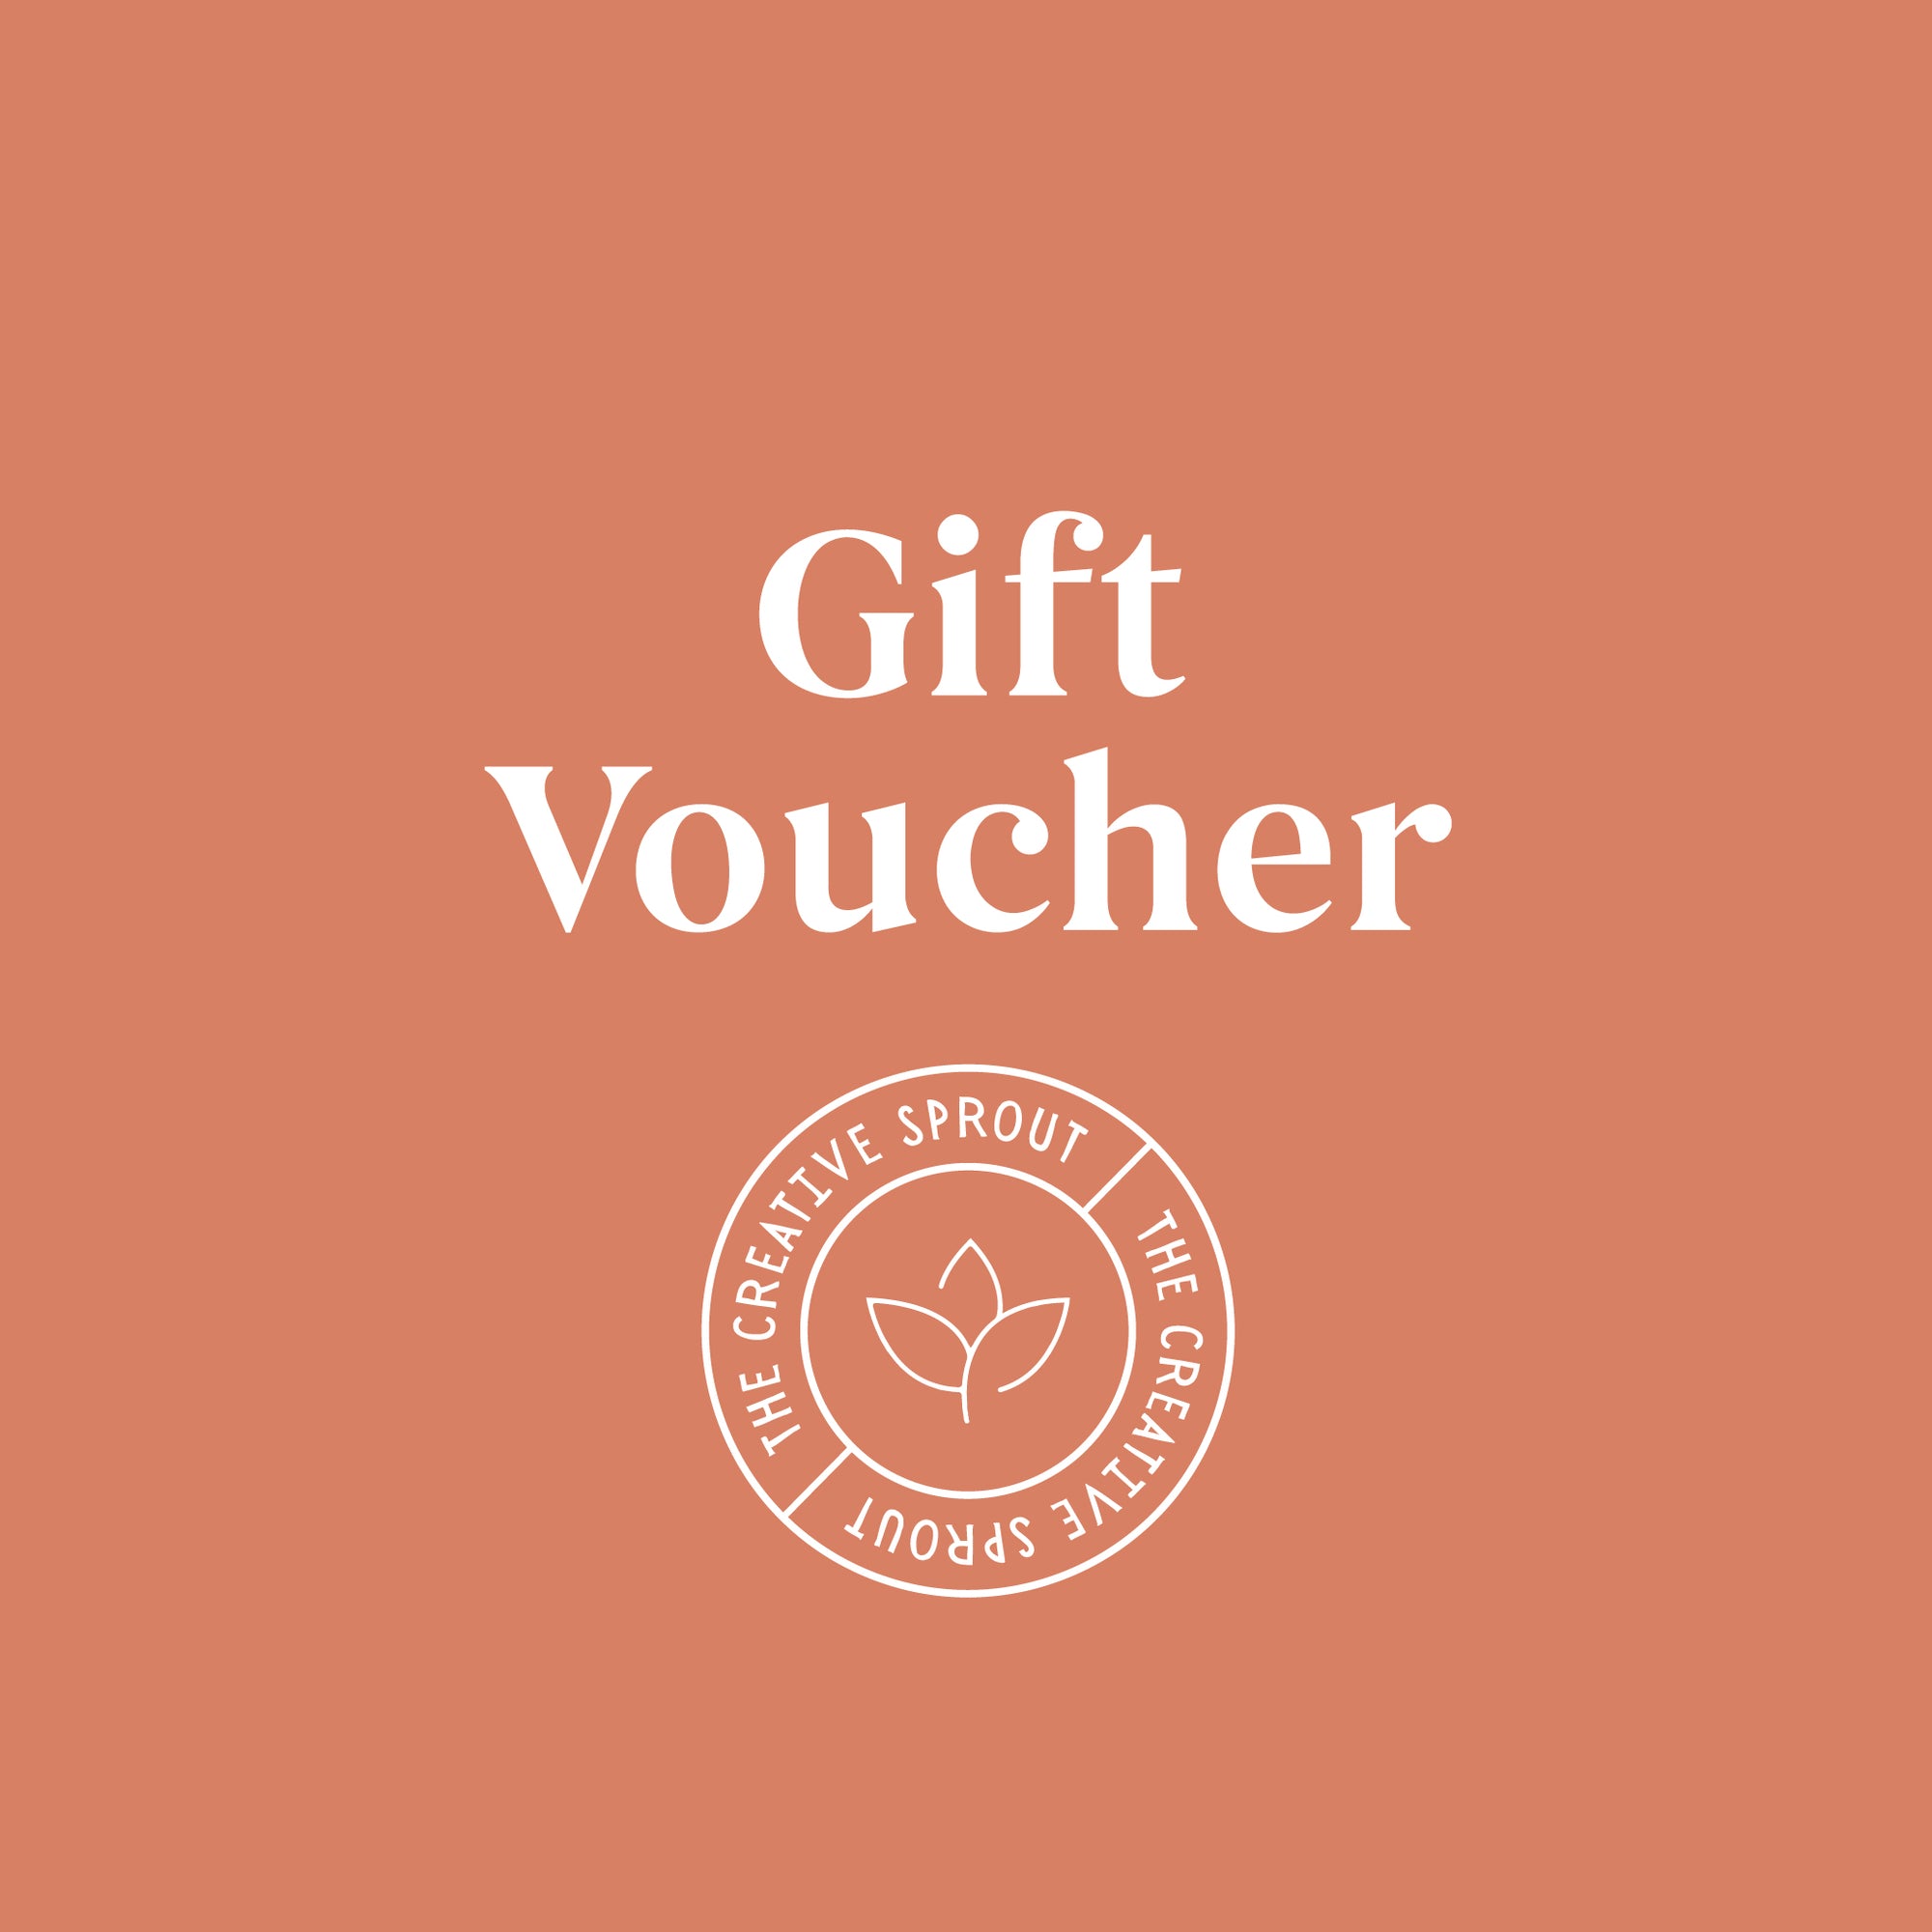 The Creative Sprout Gift Voucher